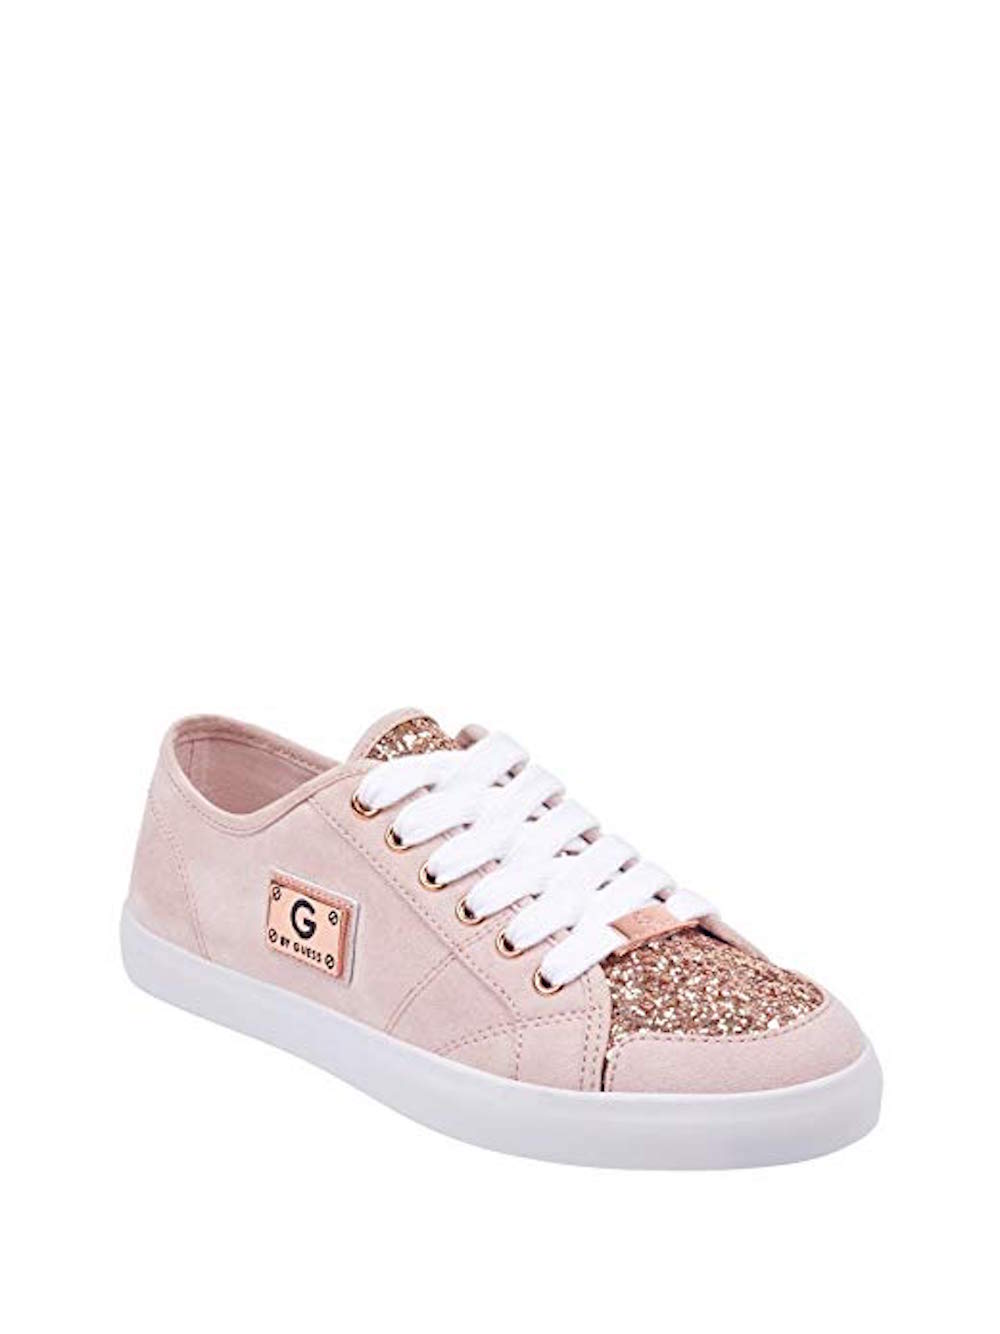 Guess Womens Matrix2 Fabric Low Top Lace Up Fashion Sneakers, Pink ...